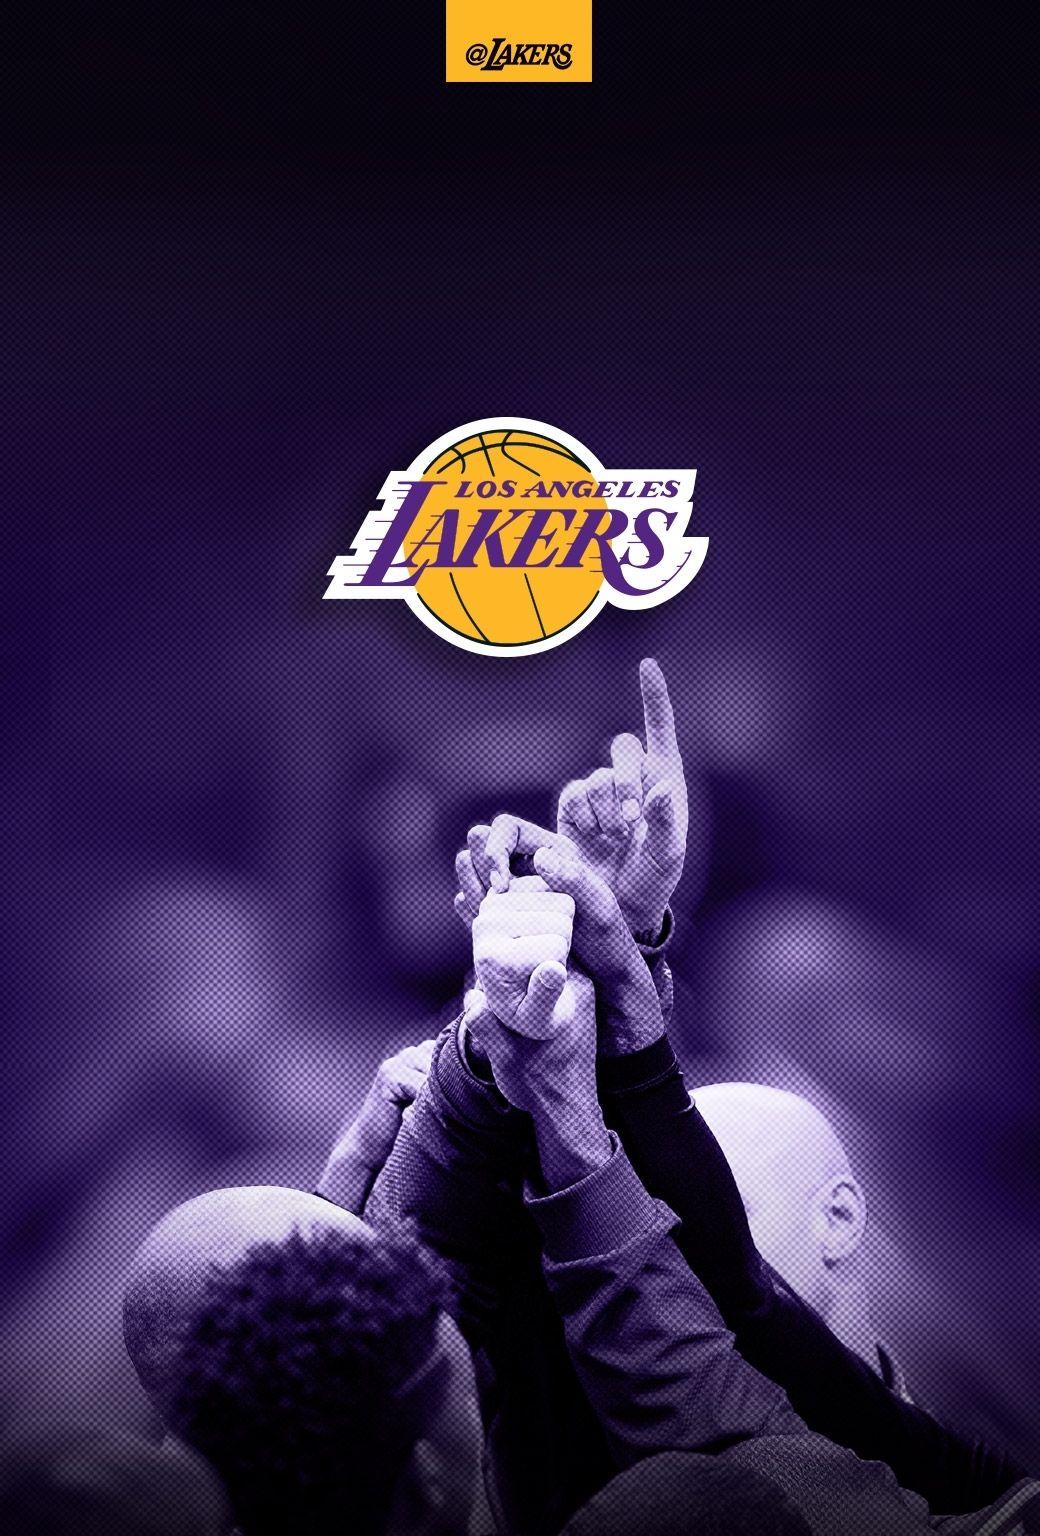 Latest La Lakers Wallpaper For Android FULL HD 1920×1080 For PC